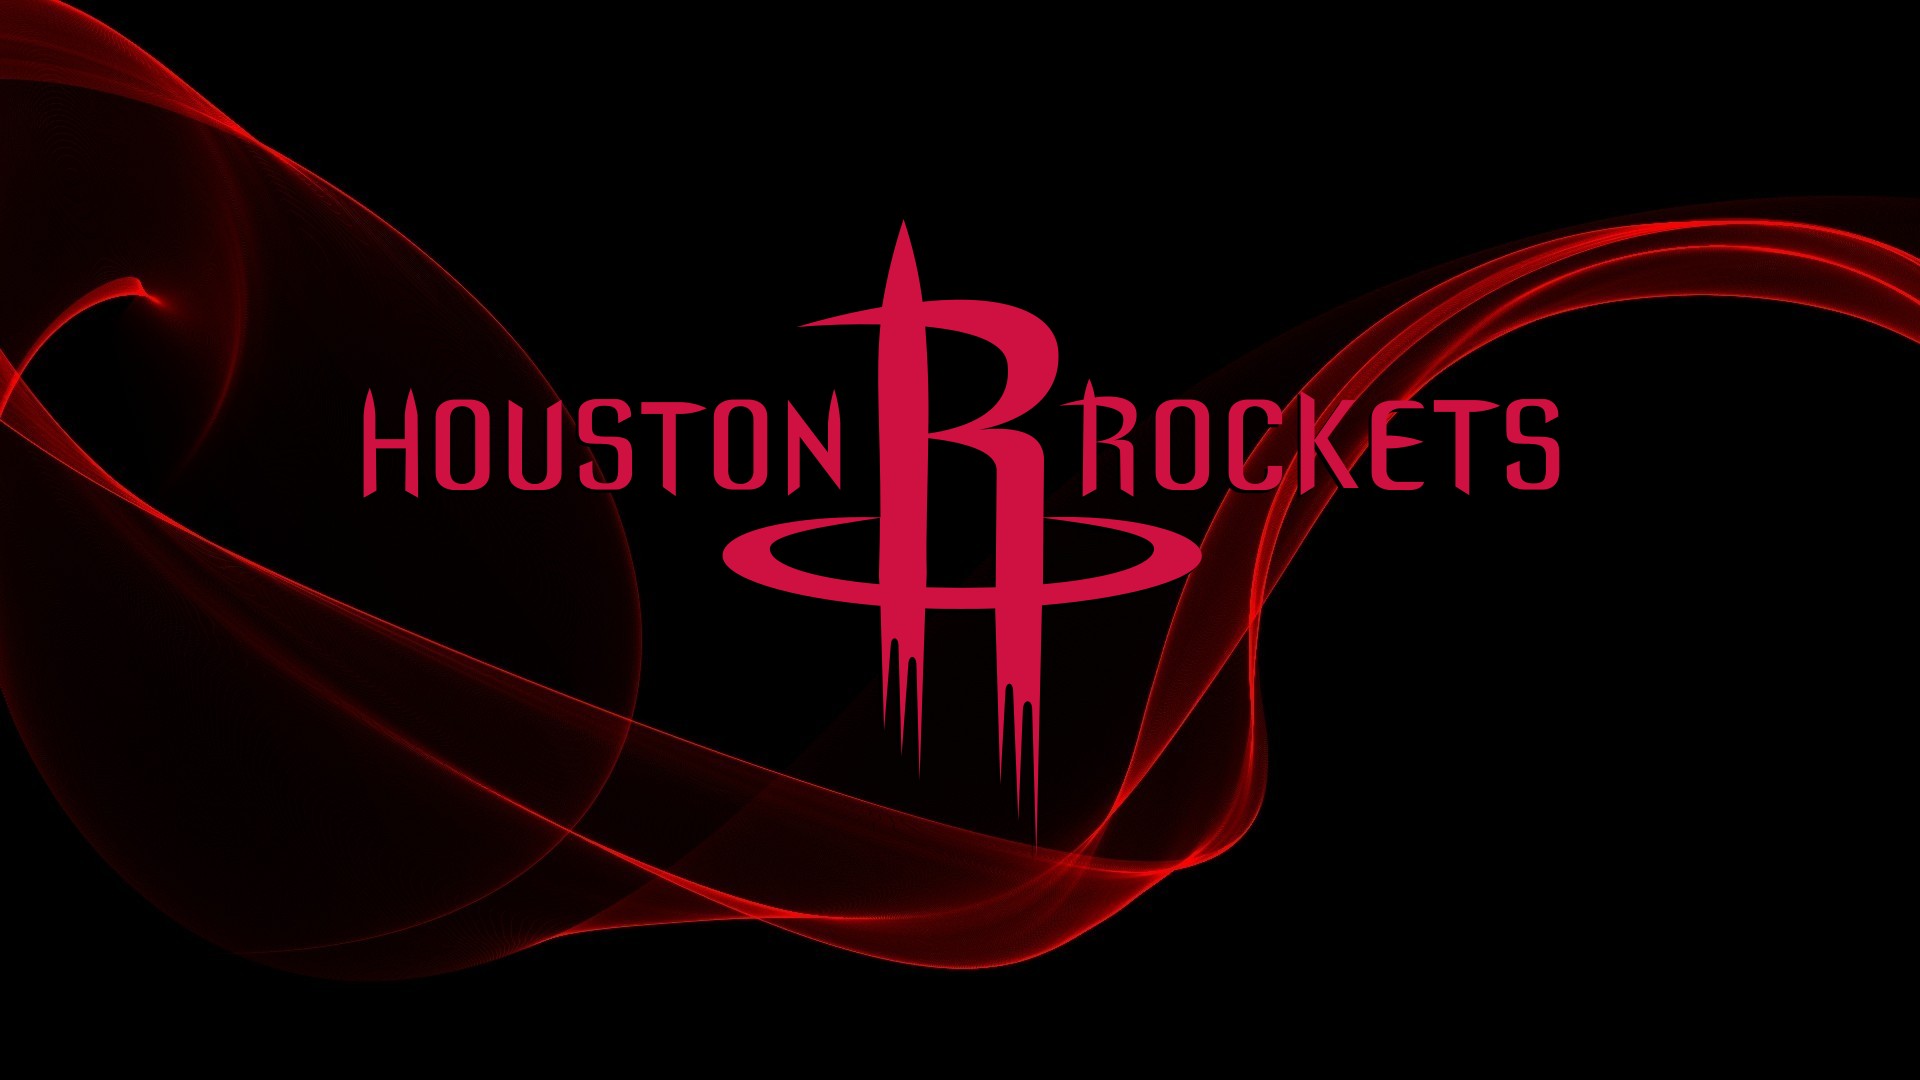 Houston Basketball For Pc Wallpaper With Image Dimensions - Pc Screensaver Basketball - HD Wallpaper 